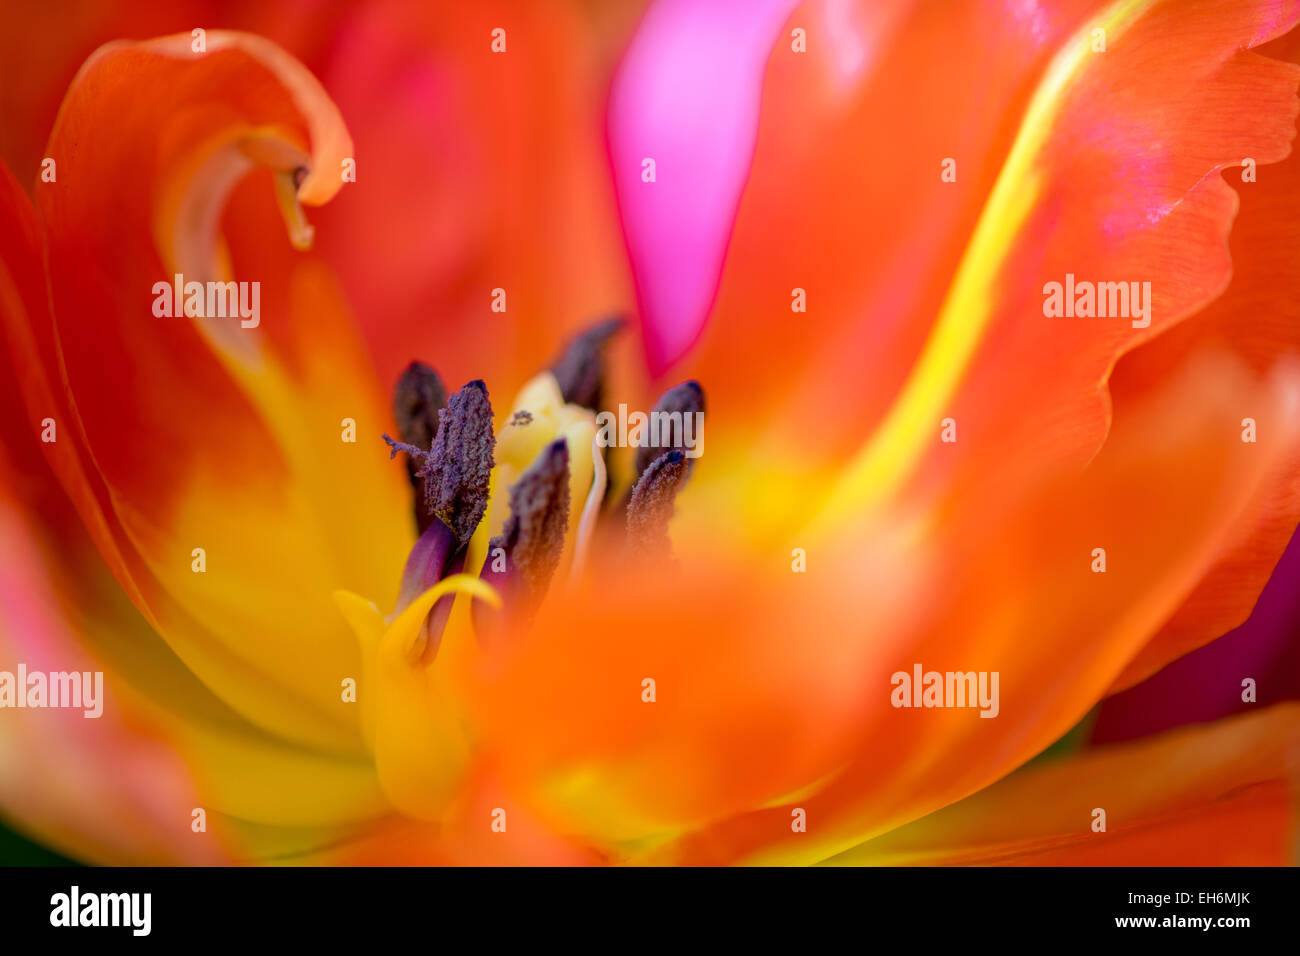 The  inside of a tred ulip soft mysterious stamens pistil Stock Photo